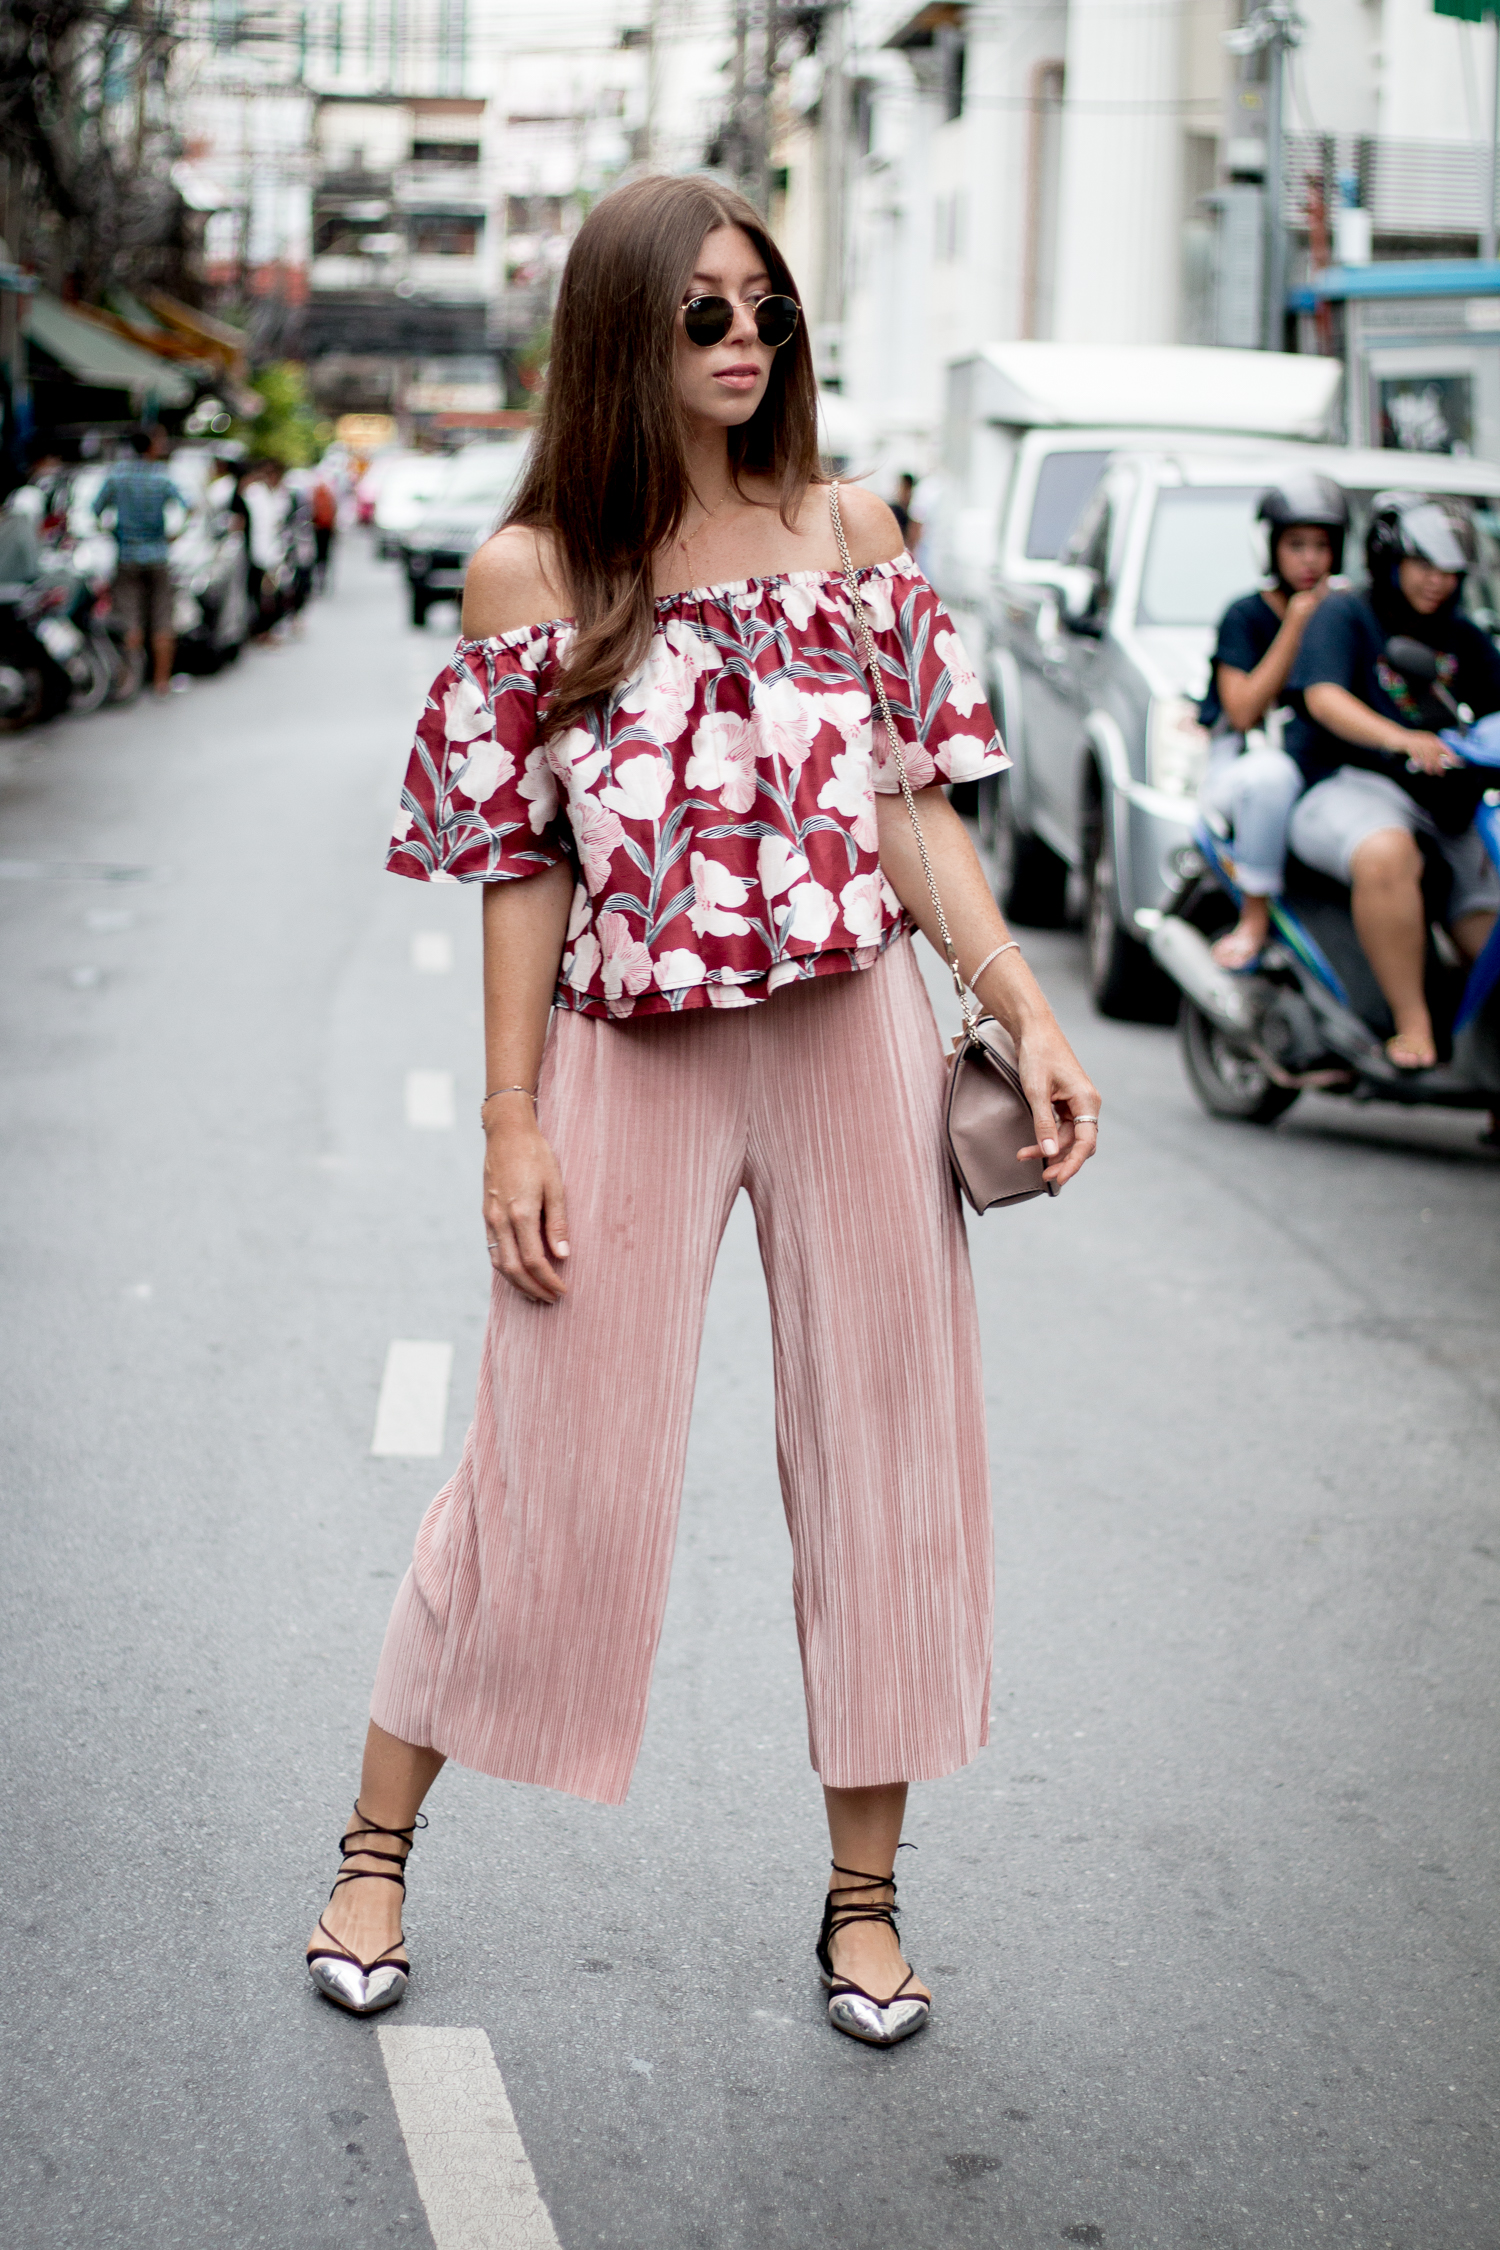 OUTFIT: the streets of Bangkok.